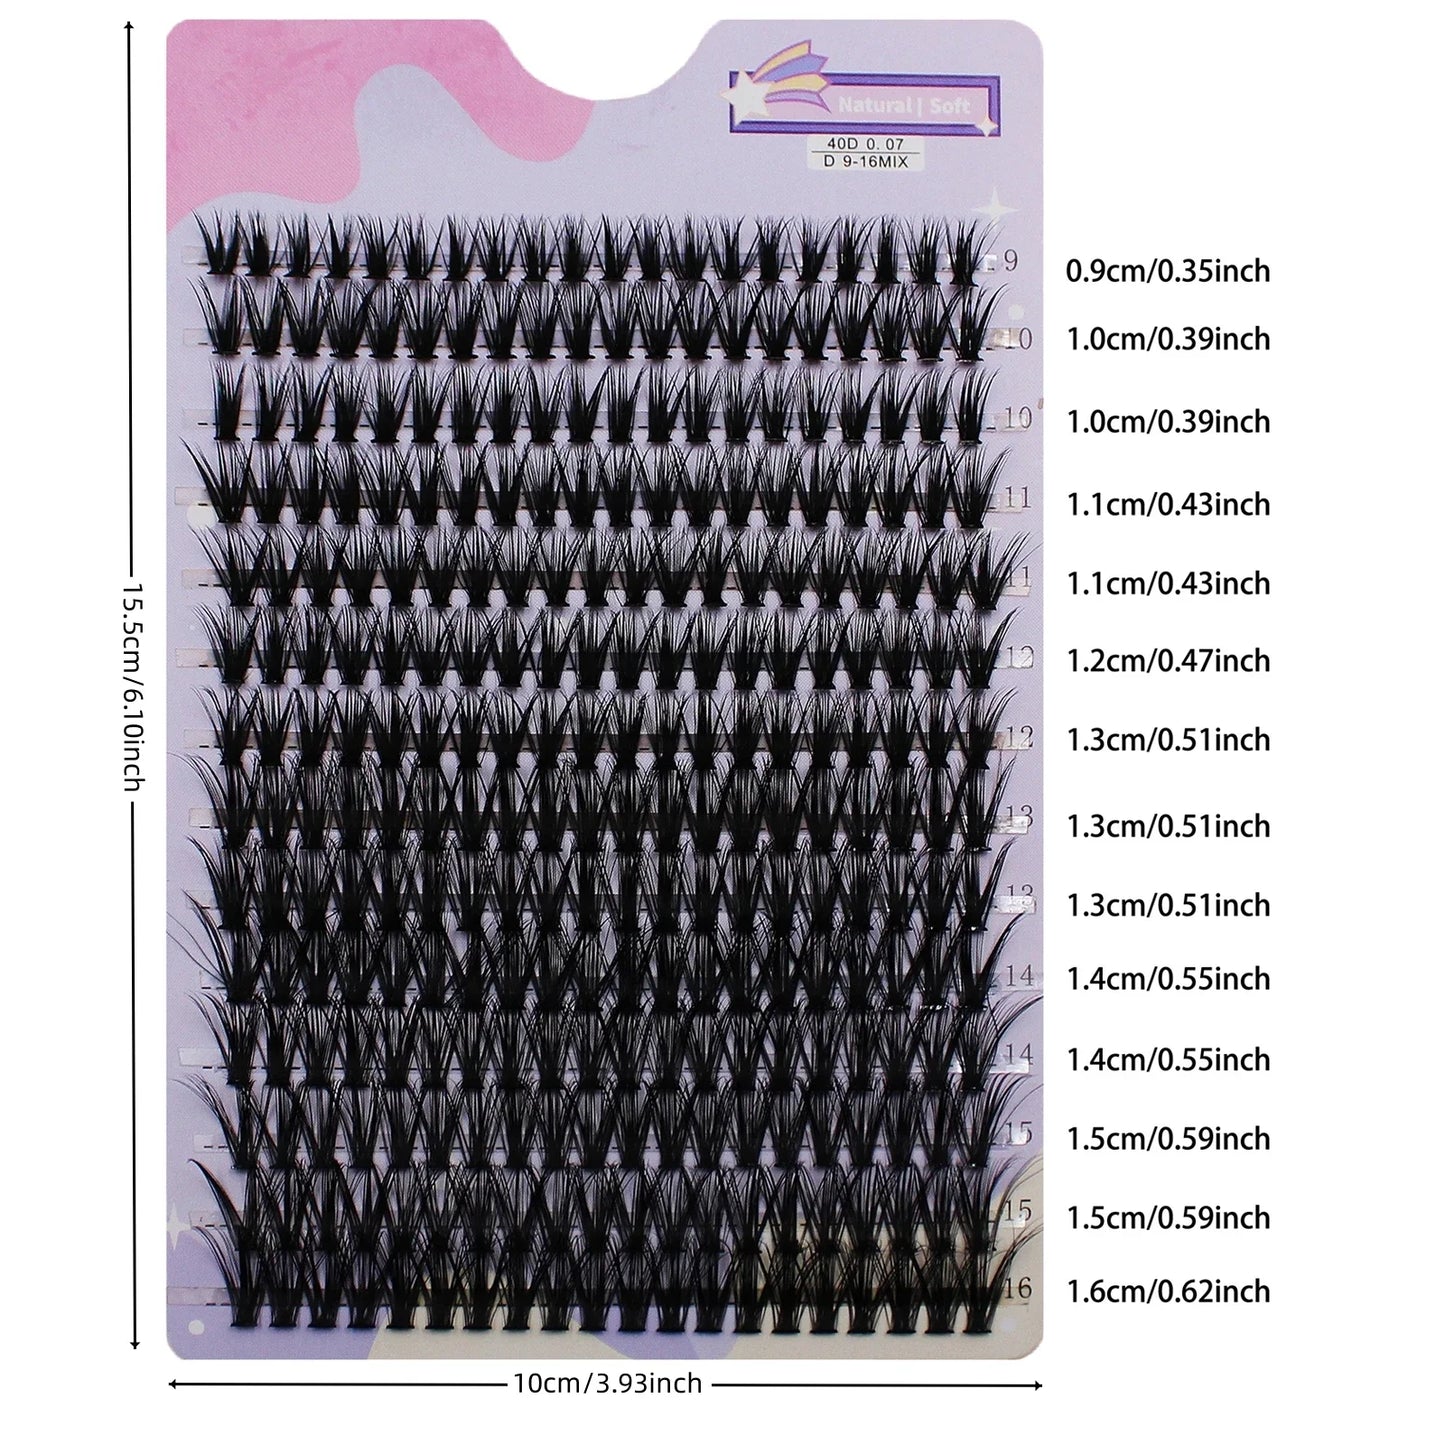 14 Rows 280 Clusters 40D Mix 9-16mm Cluster Lashes Extension Natural